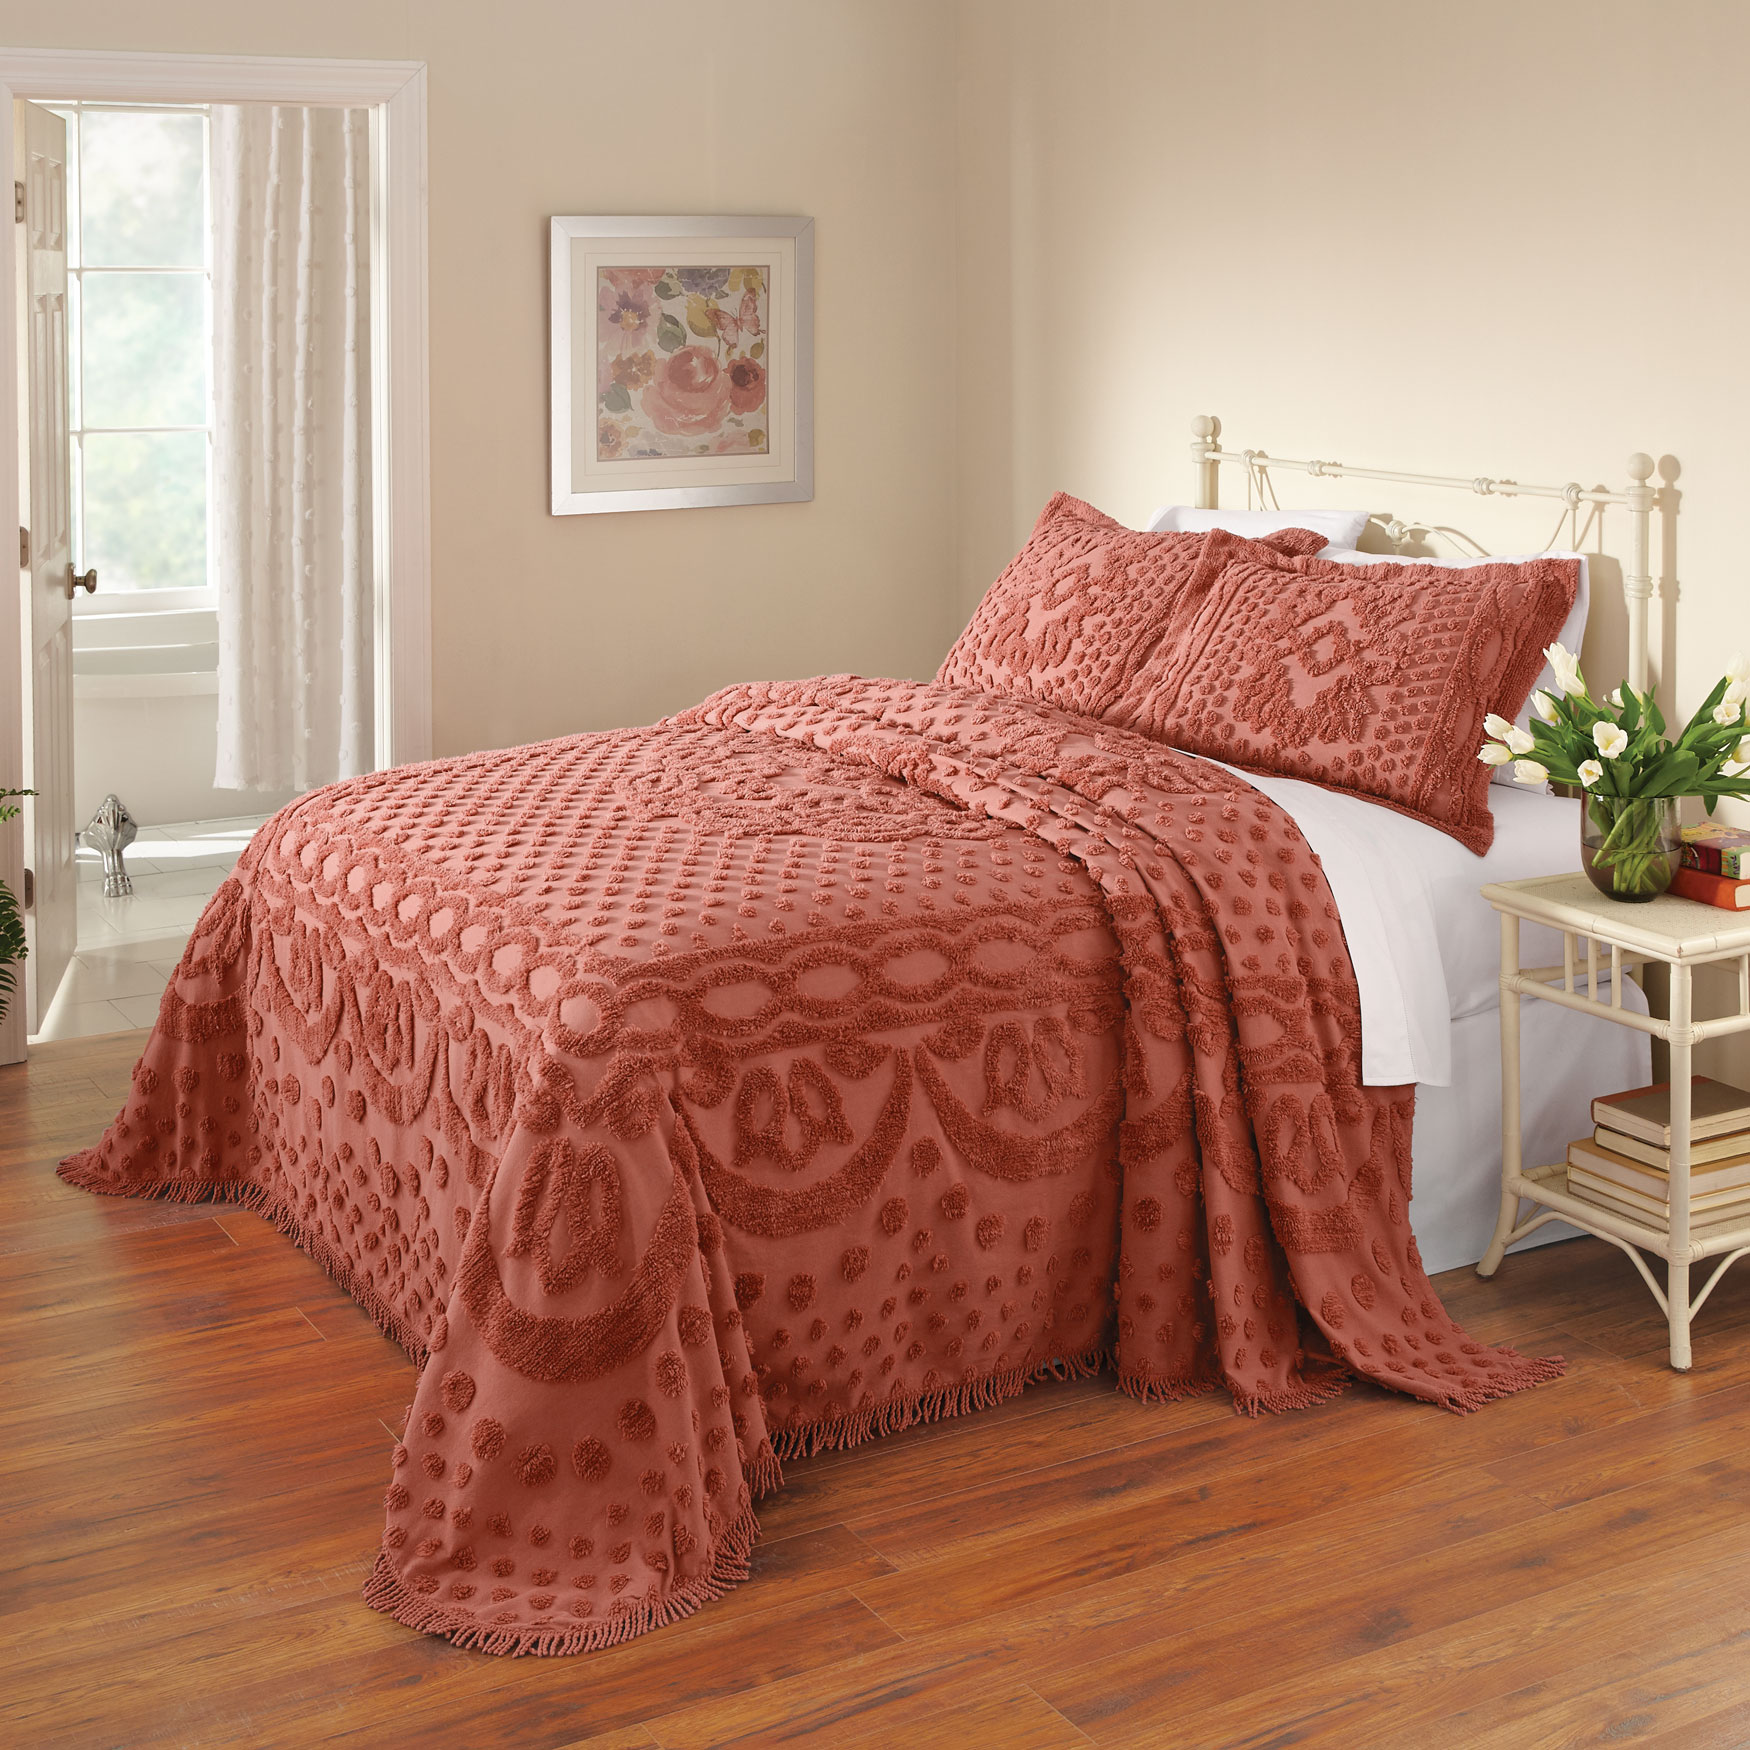 Queen Gold Maize BrylaneHome Reversible Quilted Bedspread